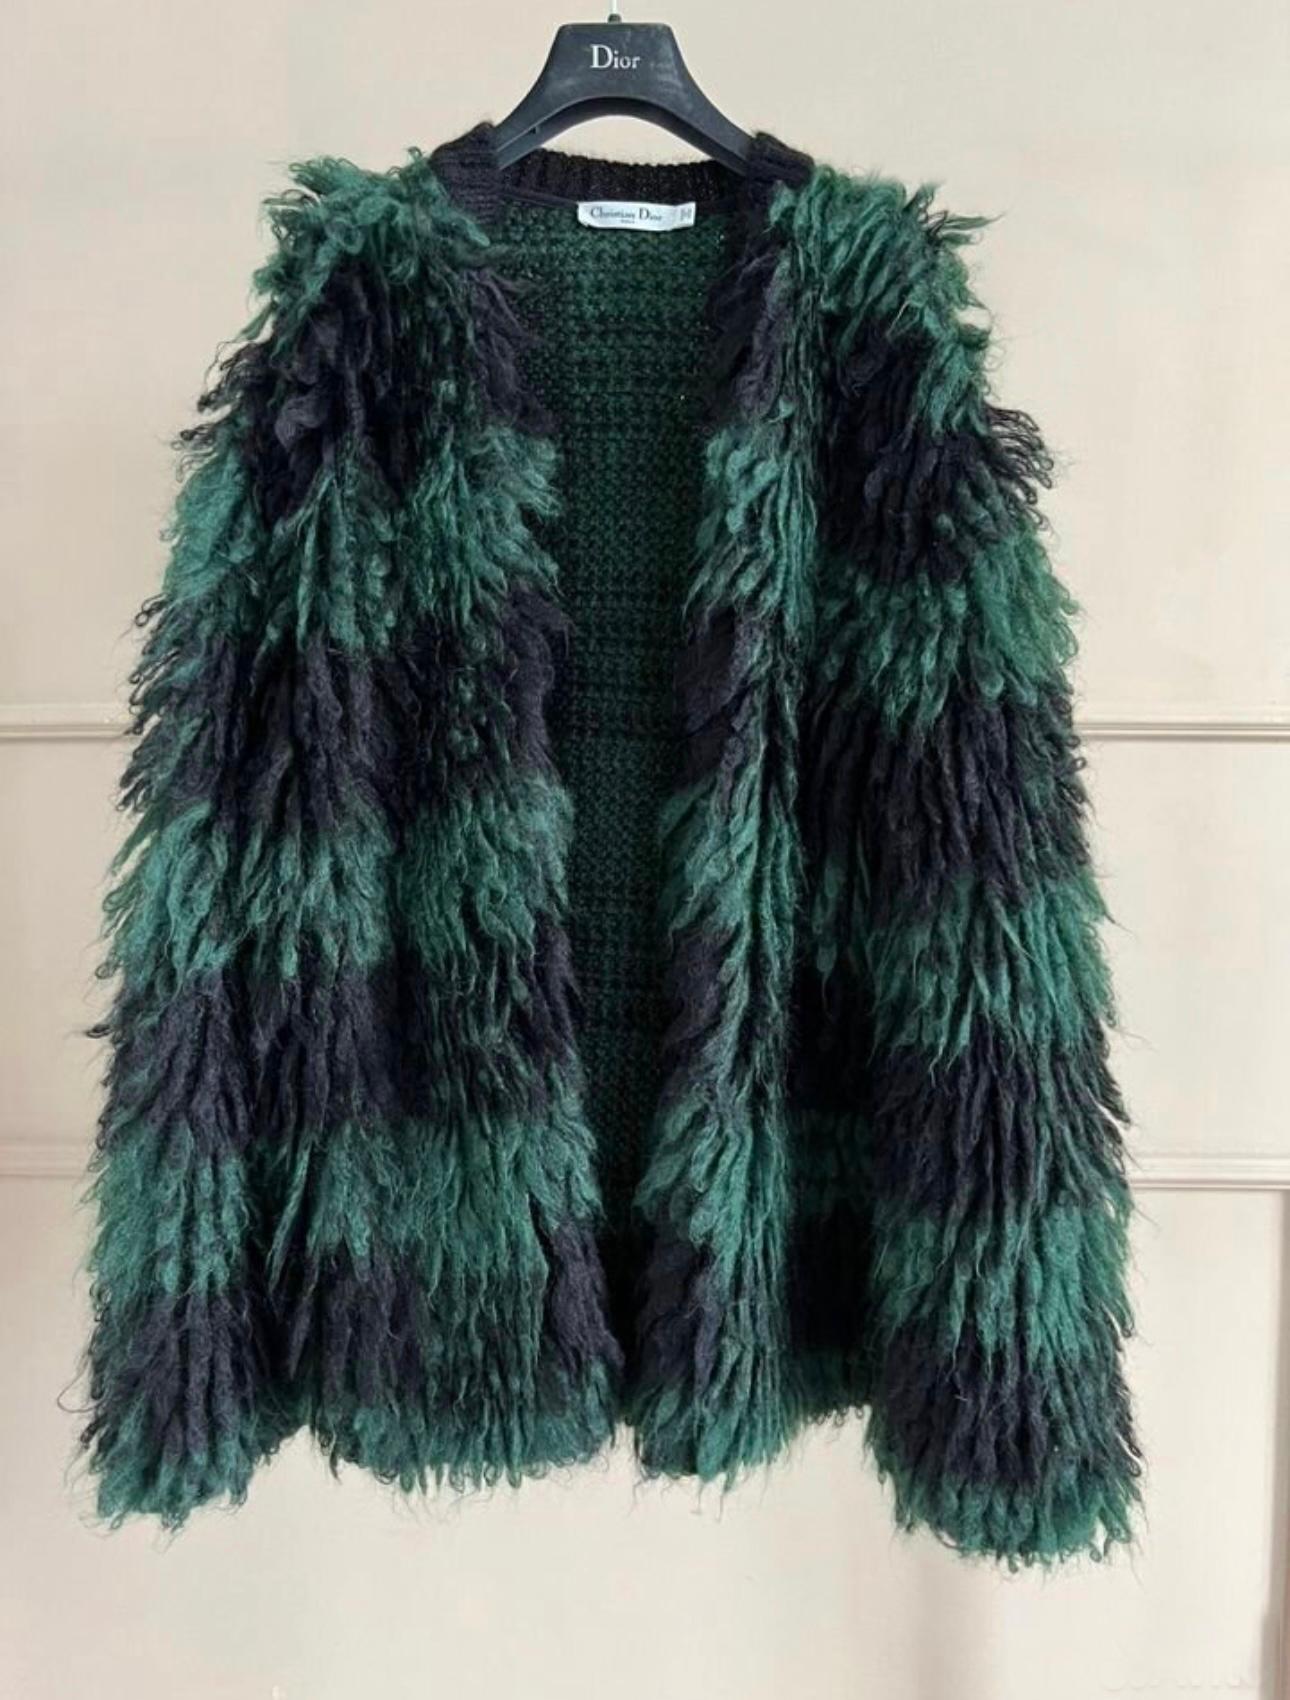 Christian Dior Runway Fluffy Mohair Cardi Jacket In Excellent Condition For Sale In Dubai, AE